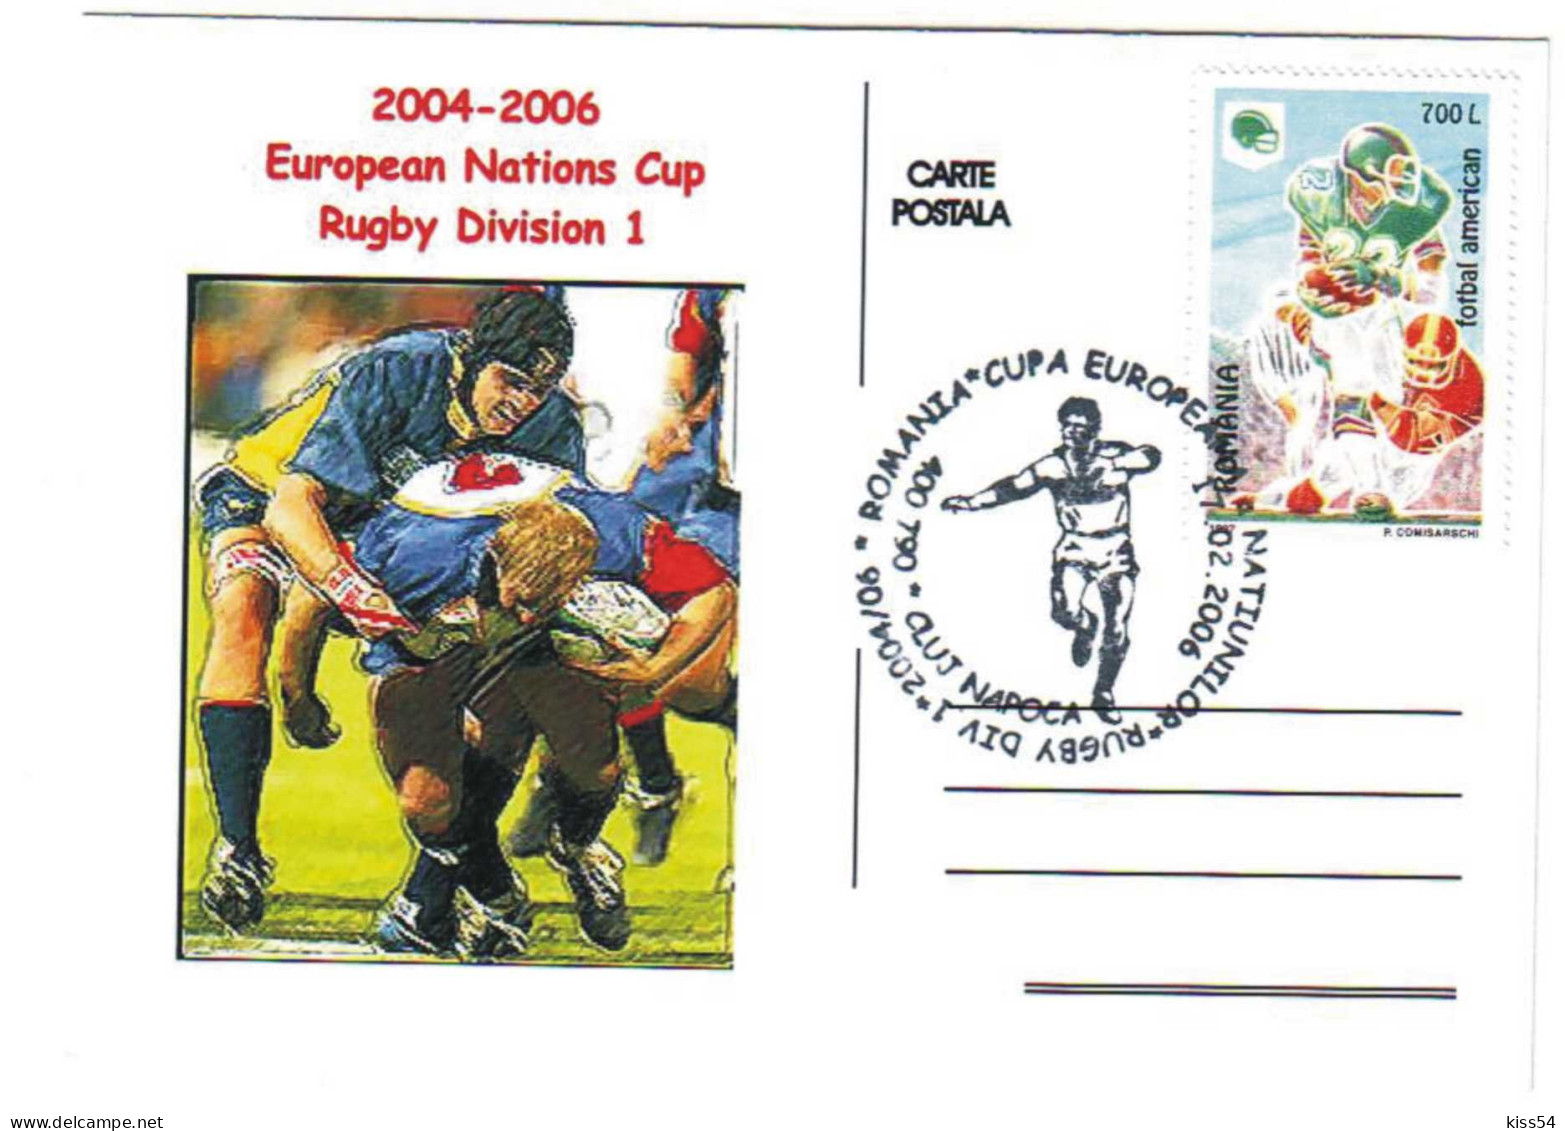 COV 17 - 265 RUGBY, Romania - Cover - Used - 2006 - Covers & Documents